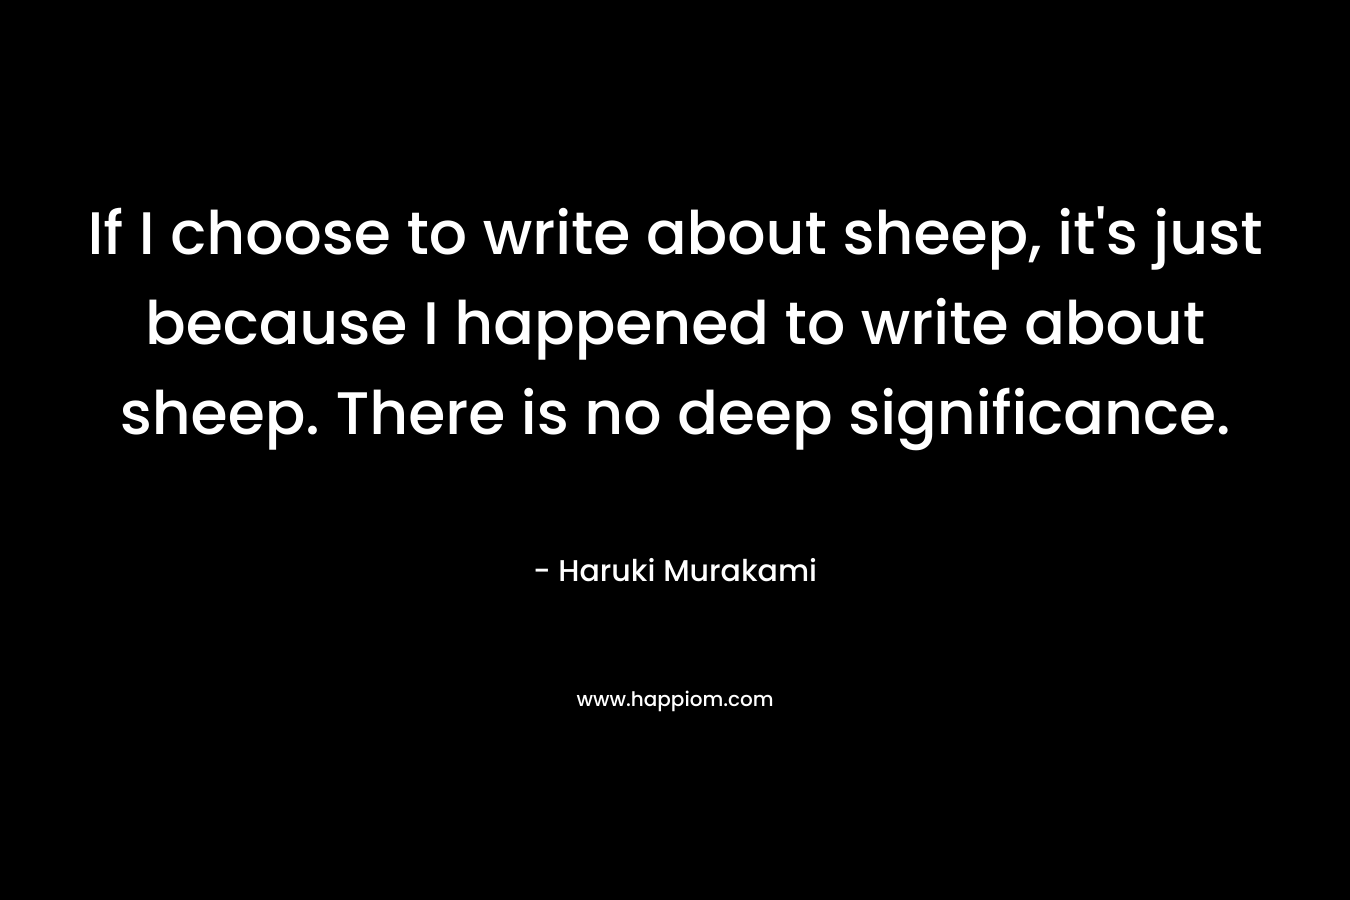 If I choose to write about sheep, it's just because I happened to write about sheep. There is no deep significance.